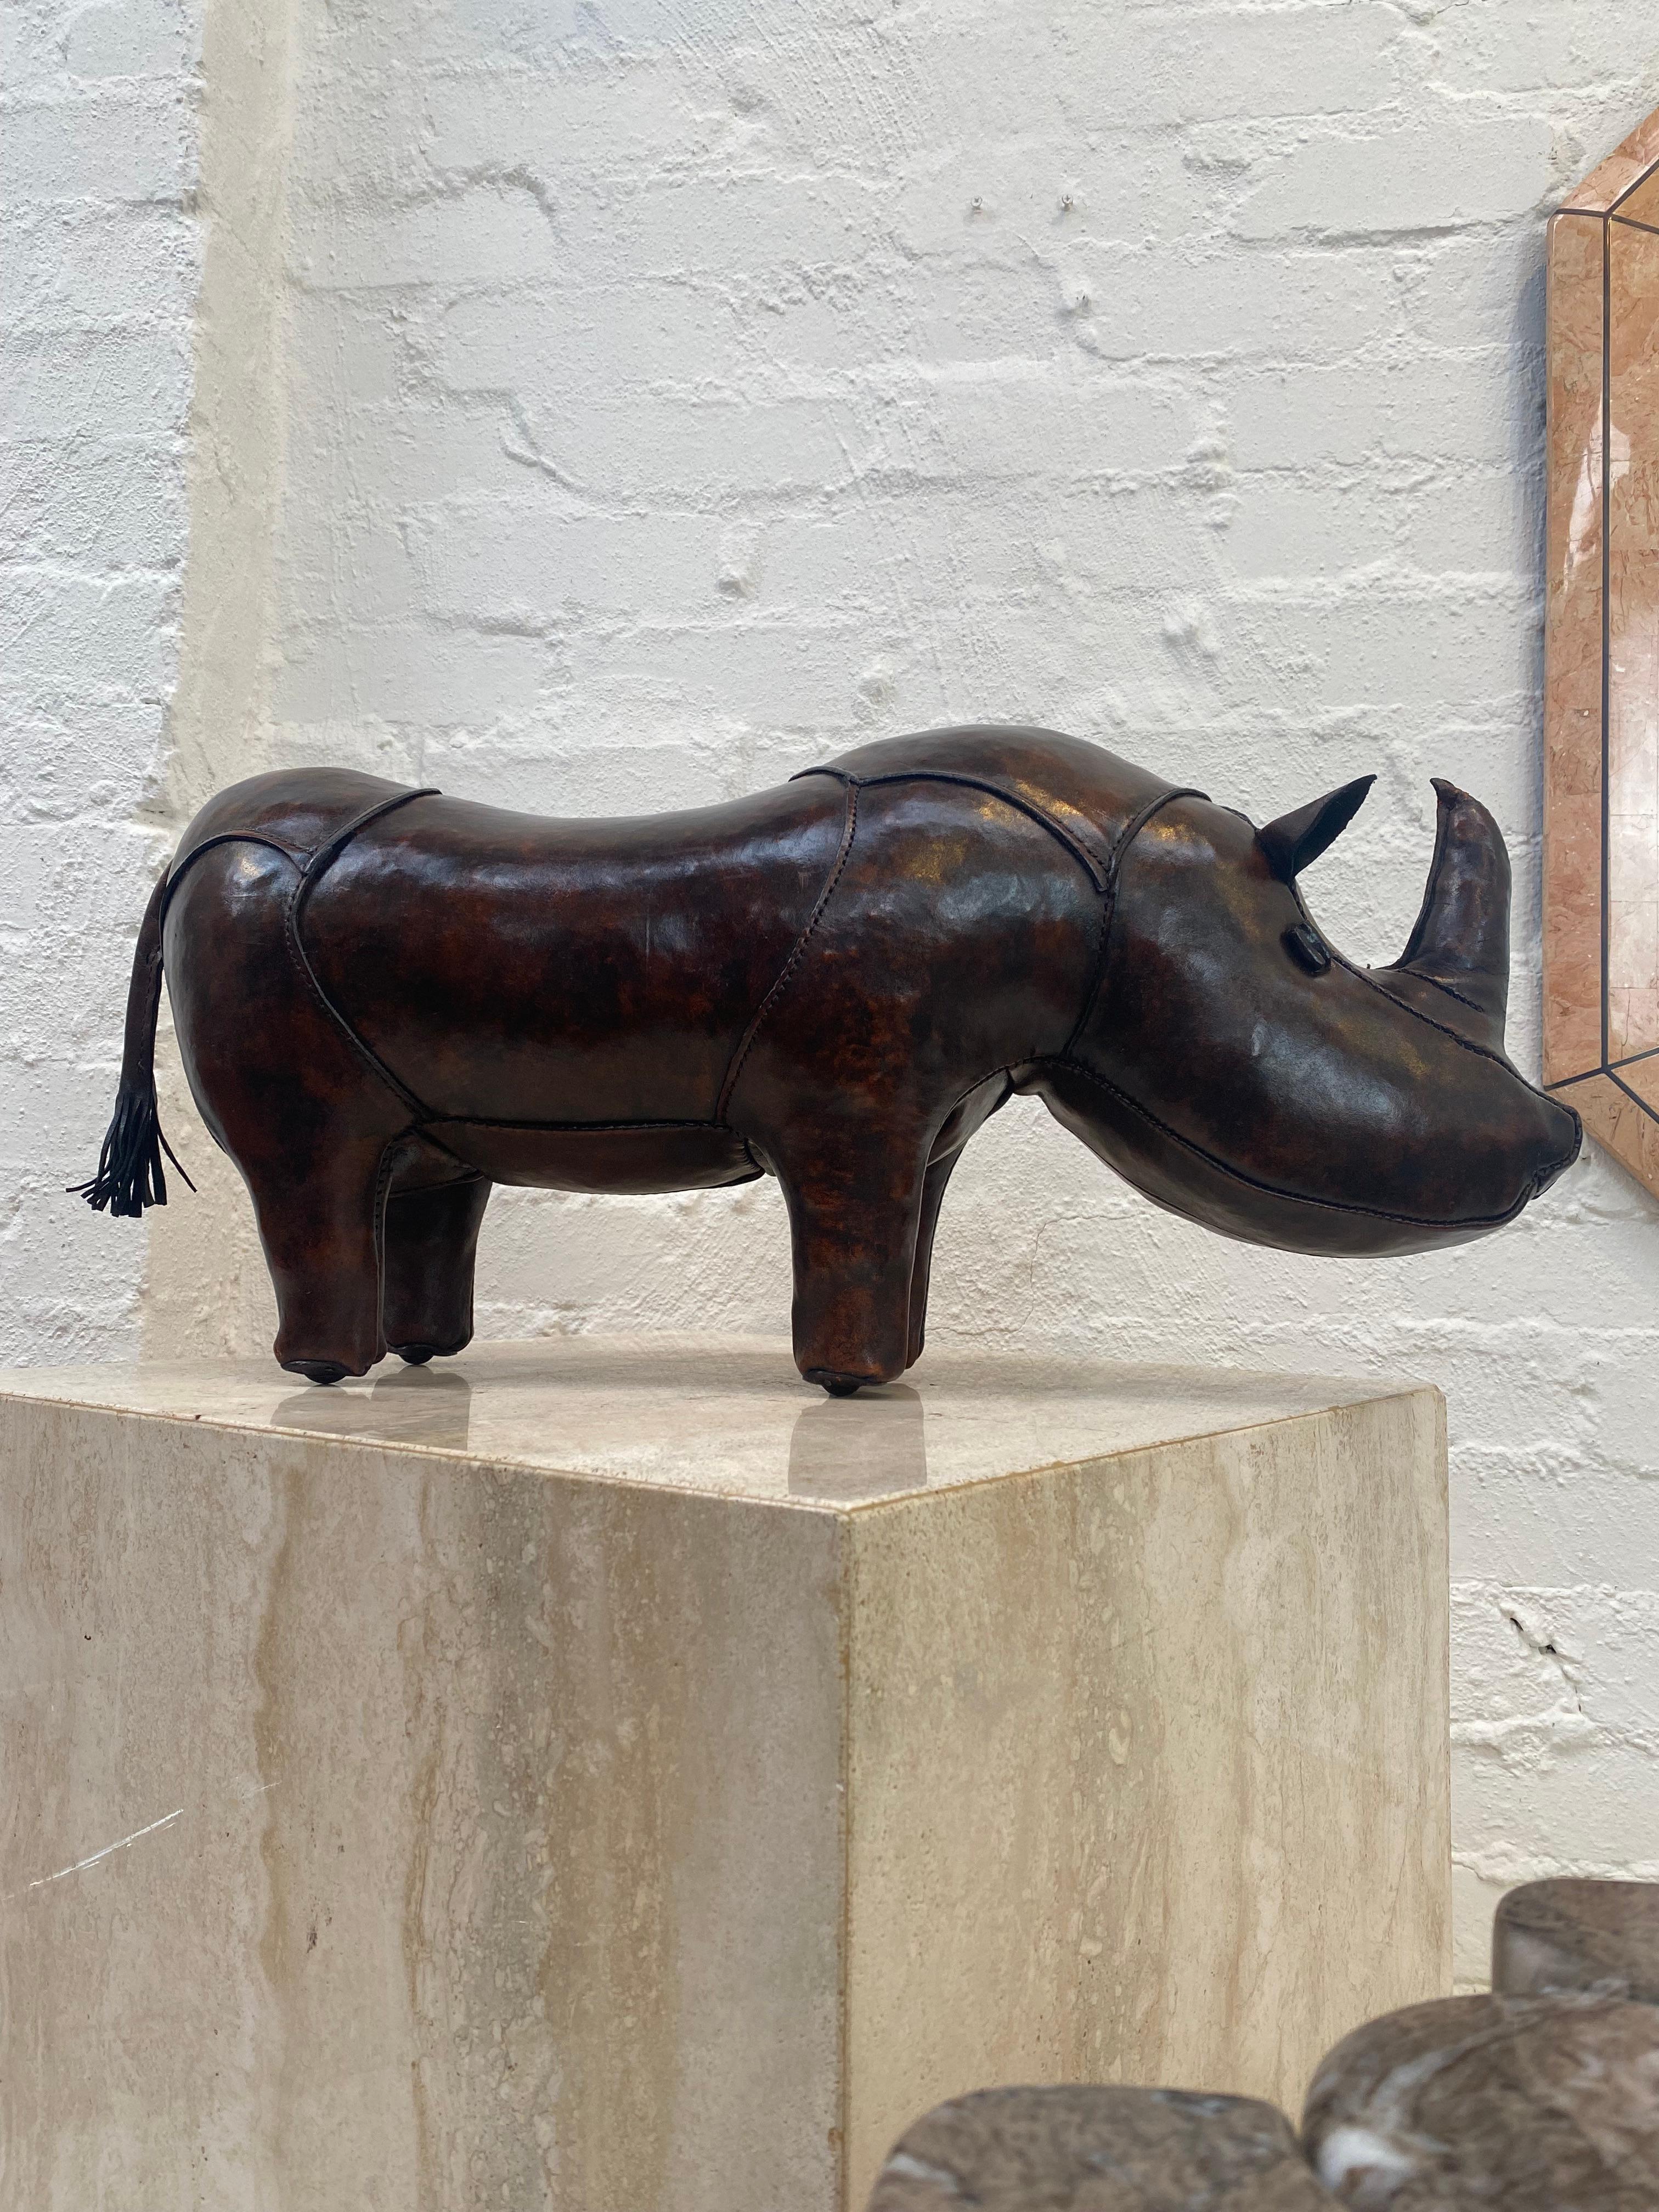 This Rhino will steal your heart. It's in exceptionally good condition for its age and shows all the signs of having lived a quiet life, with one owner since purchase. There are barely any signs of use or wear. Just a bit aging of the leather, which